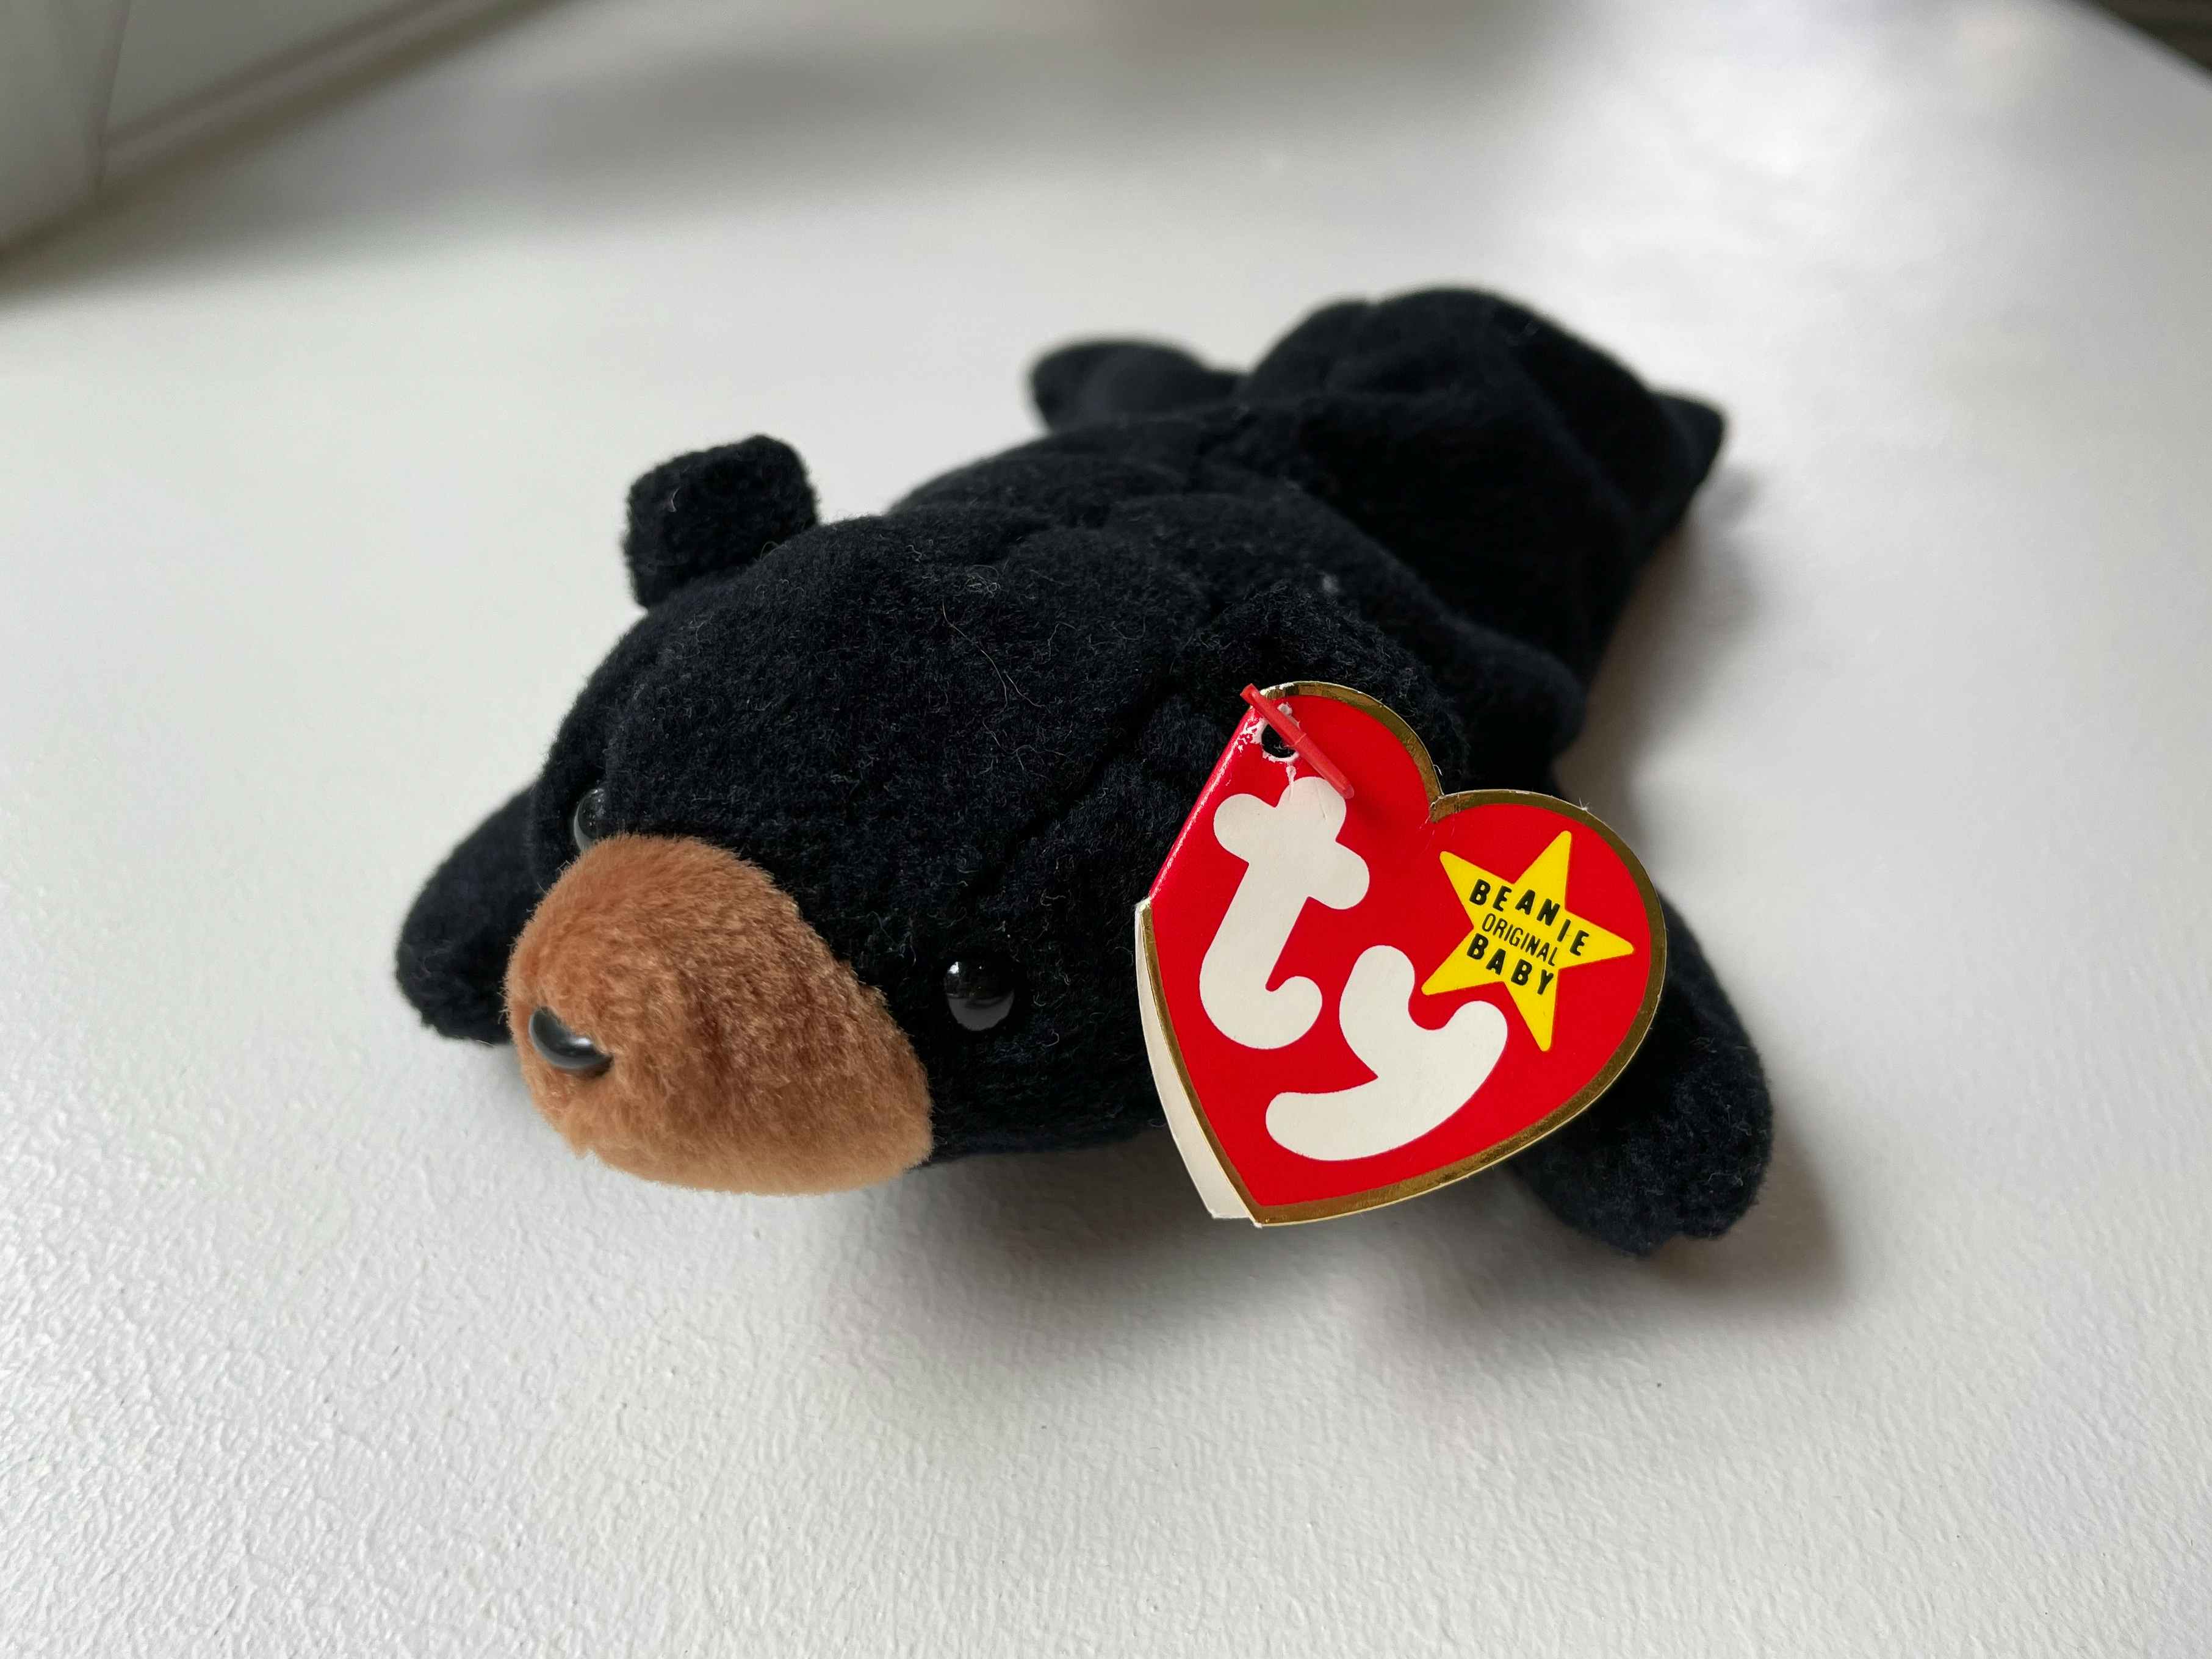 A Blackie the Black Bear beanie baby sitting on a white table.